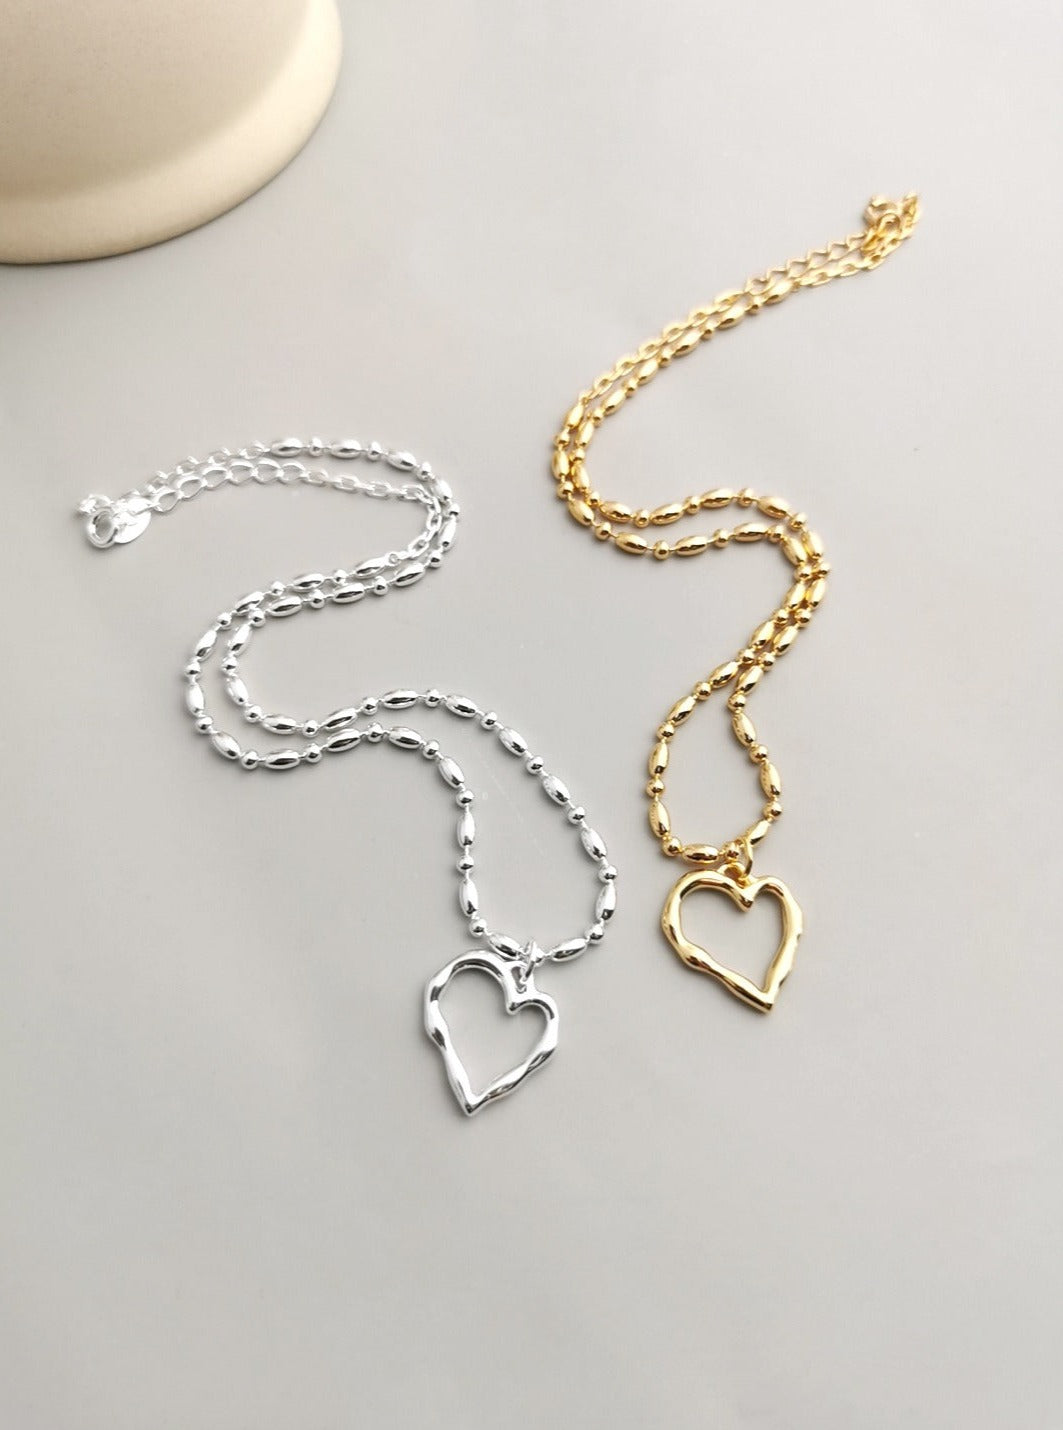 Irregular Heart Pendant Necklace: Artistic Asymmetry necklaces from SHOPQAQ